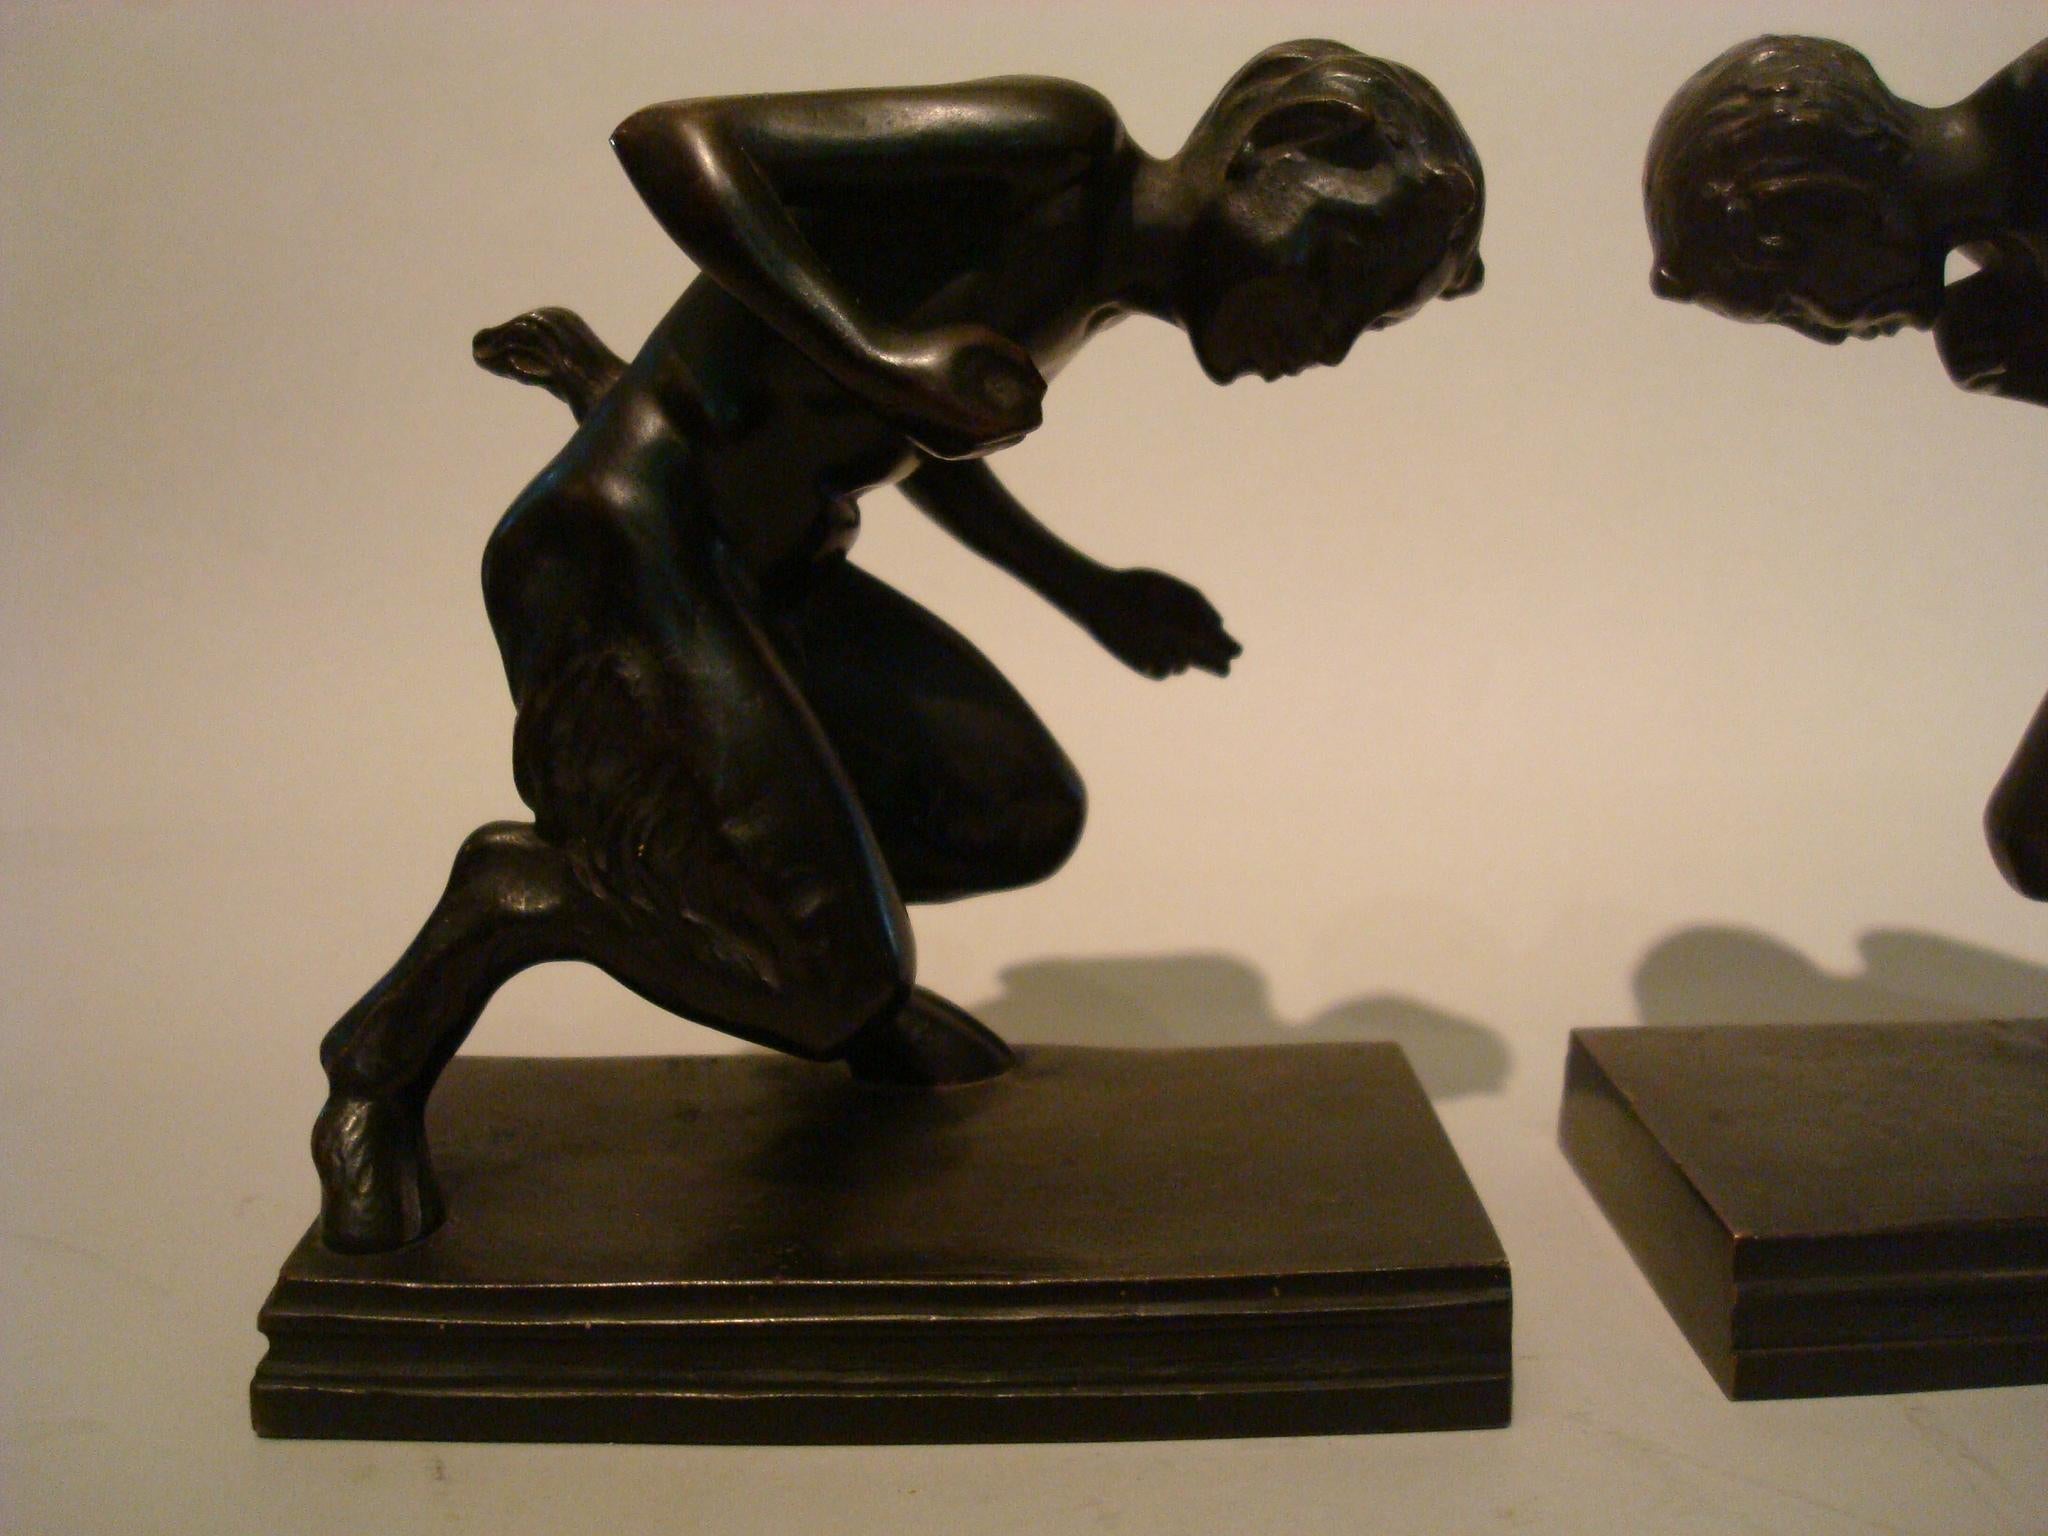 Pair of bronze Faun figures bookends, Austrian, early 20th century, attractive patina, one stamped with a very small triangular foundry mark. Very nice pair of sculptures.